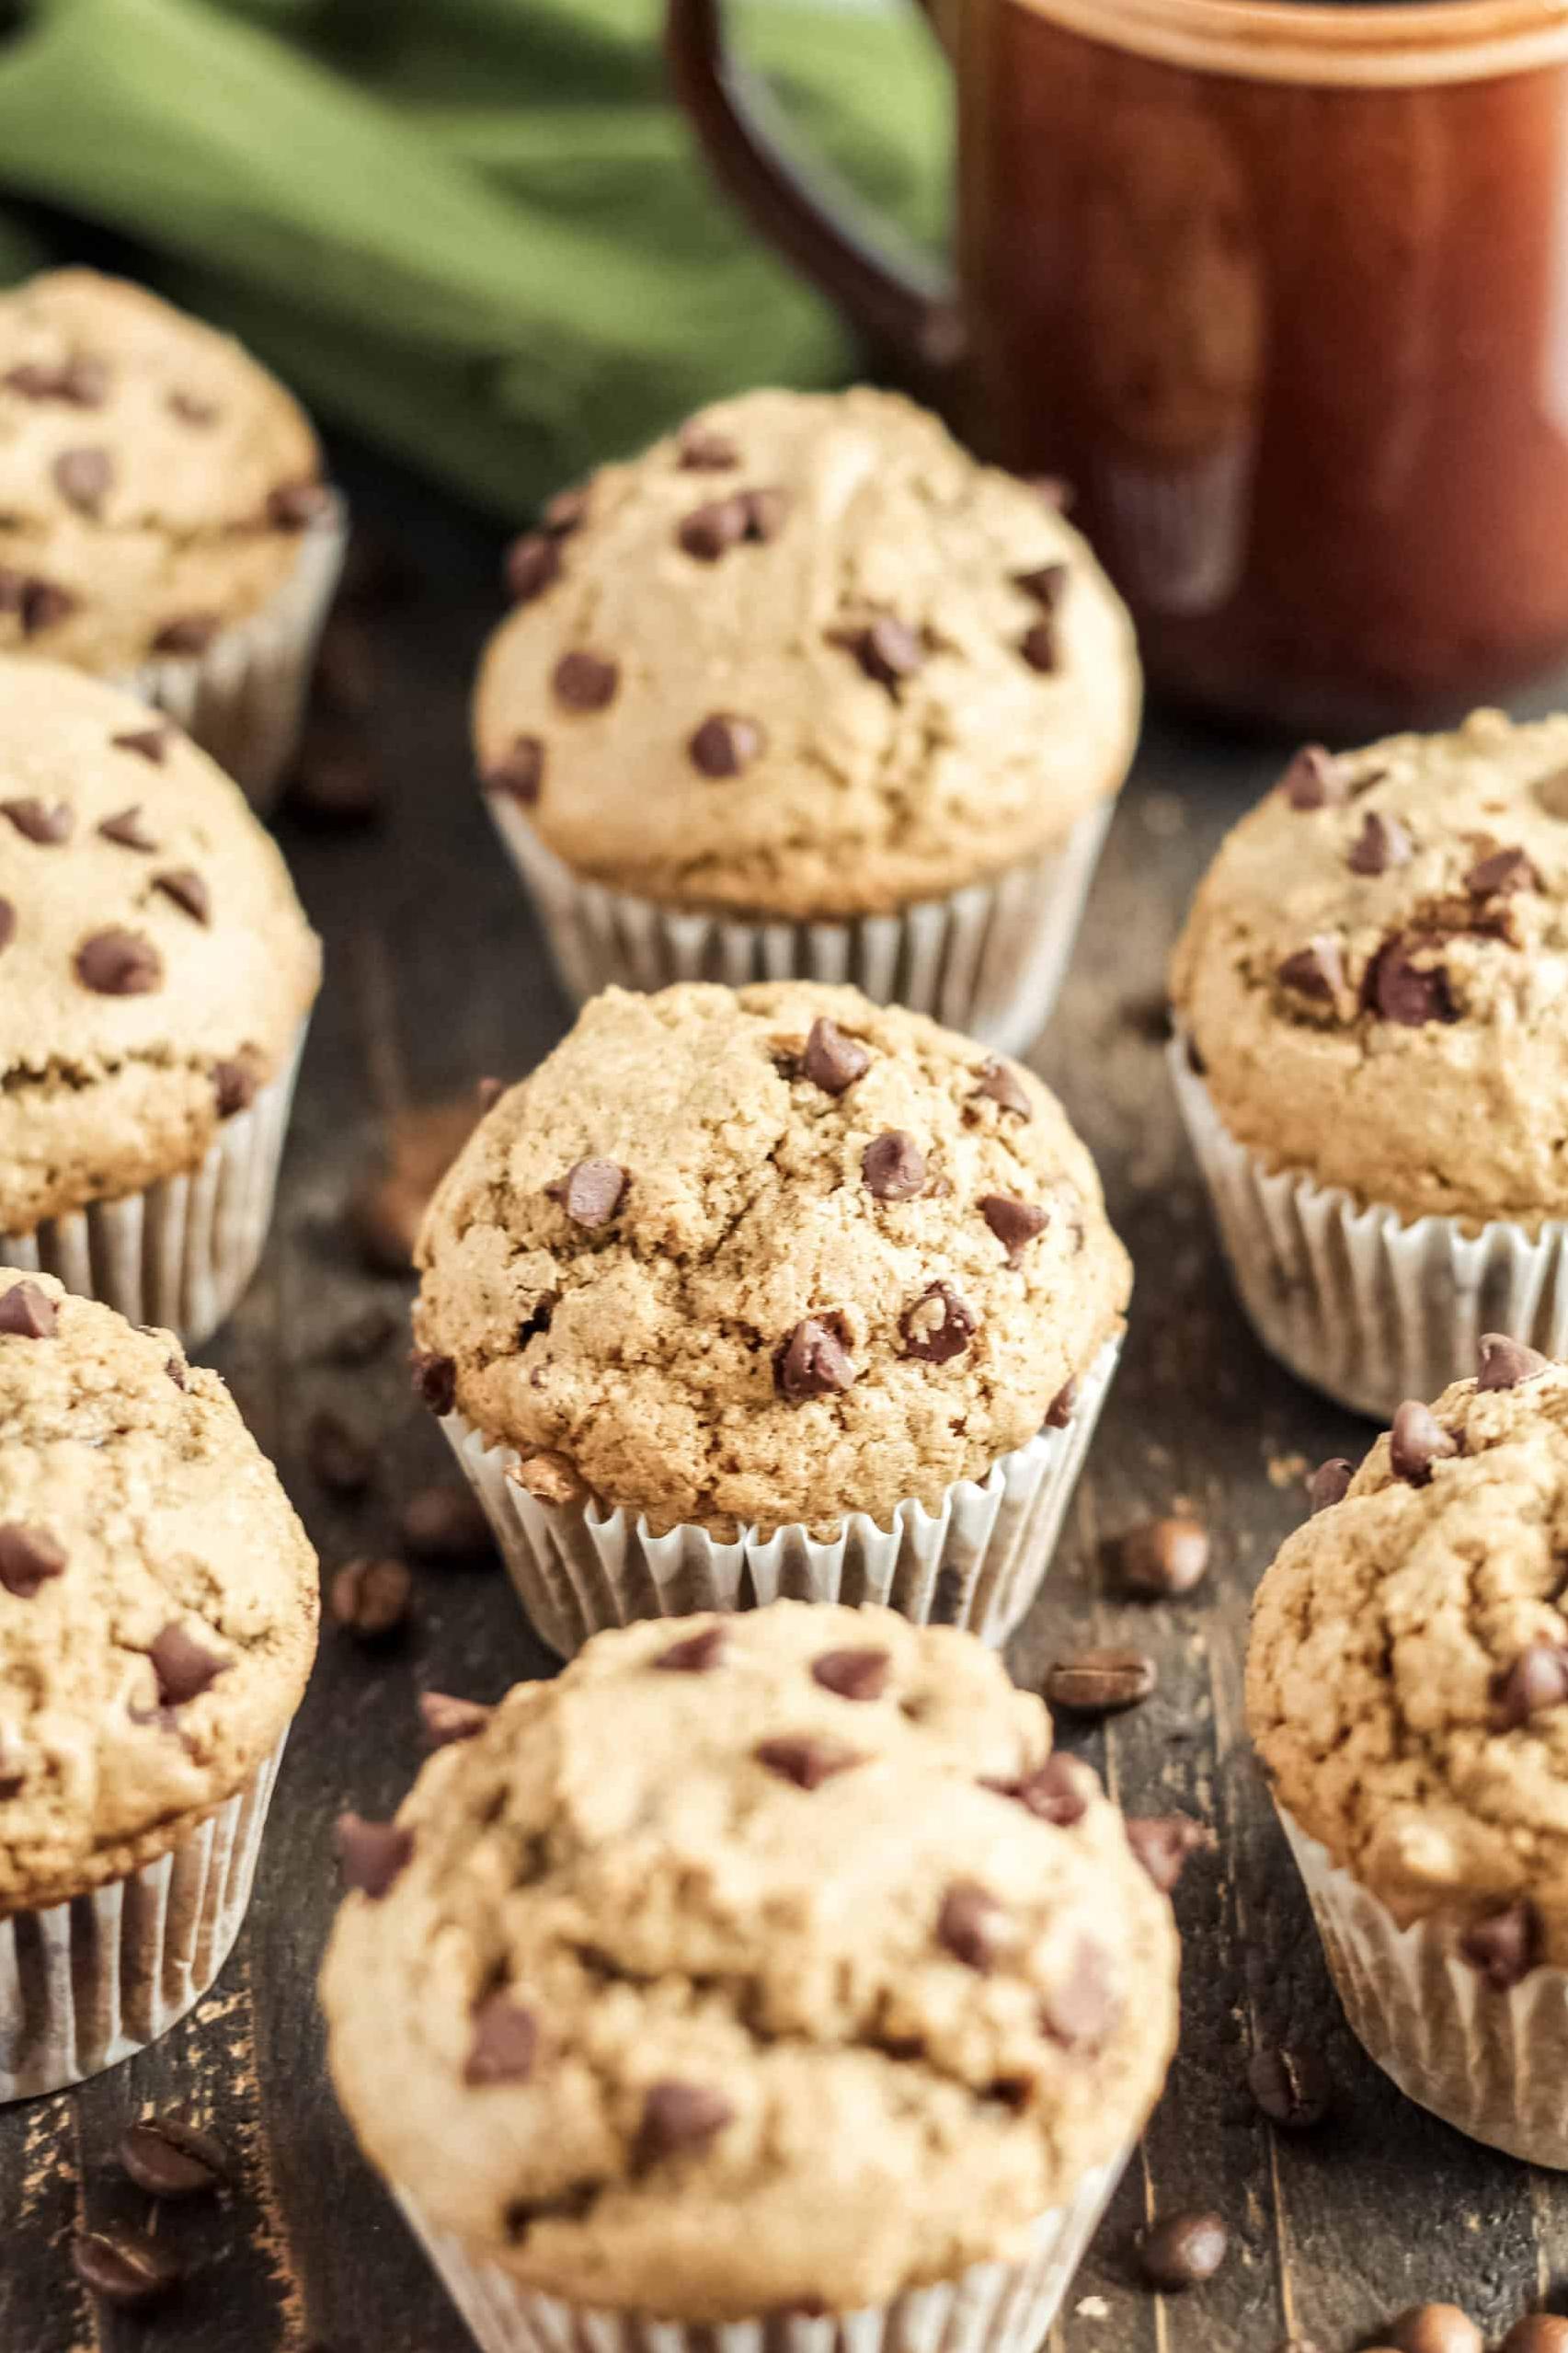  This recipe is like your favorite cafe cappuccino in a muffin—what could be better?